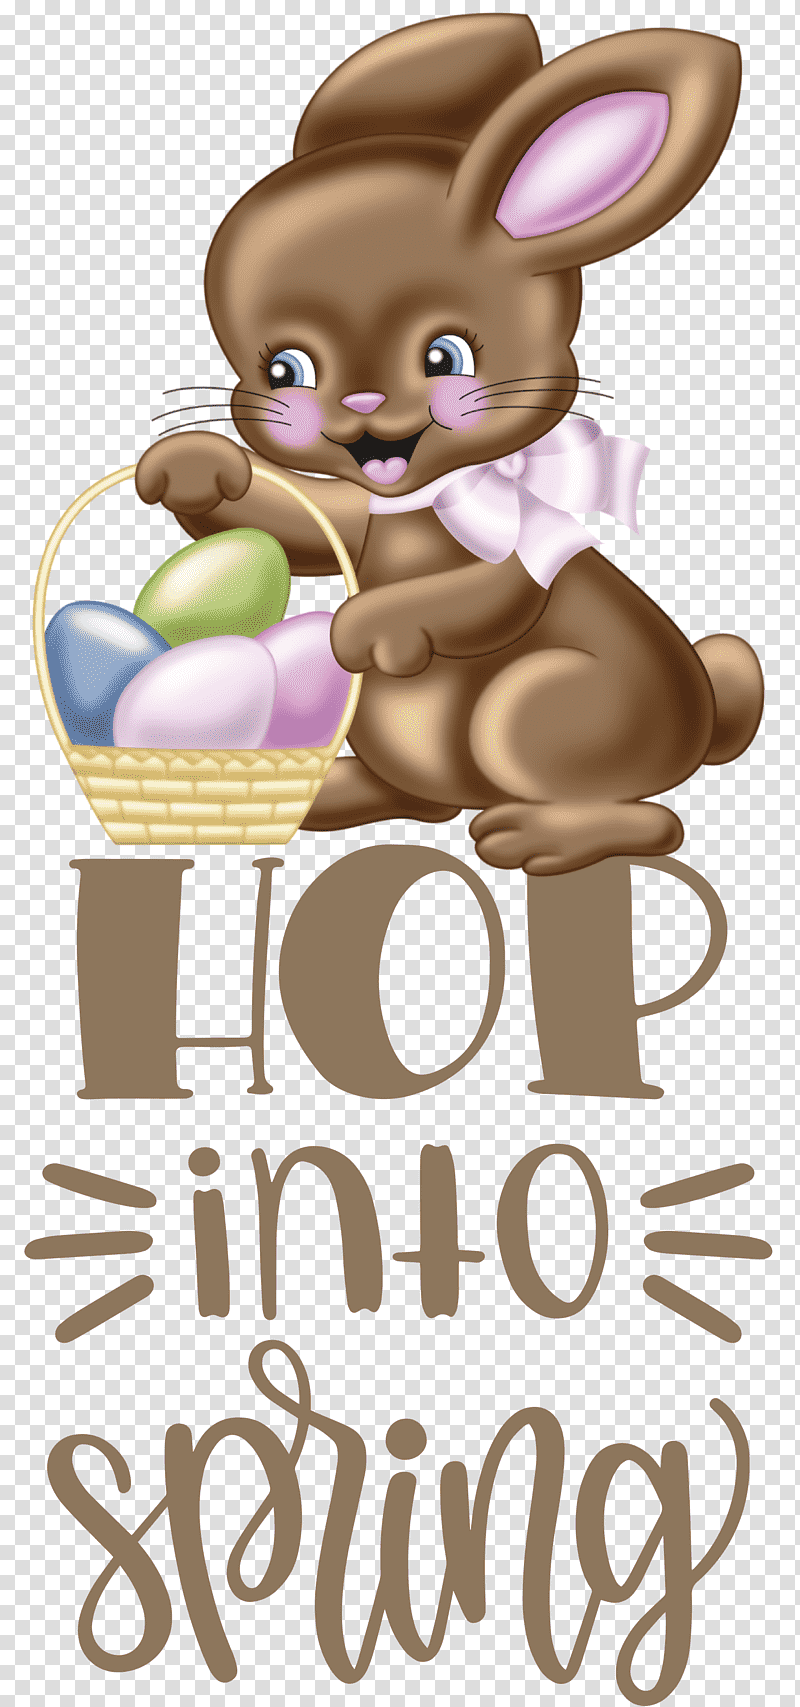 Hop Into Spring Happy Easter Easter Day, Easter Bunny, Easter Egg, Holiday, Easter Basket, Easter Sunday, Rabbit transparent background PNG clipart